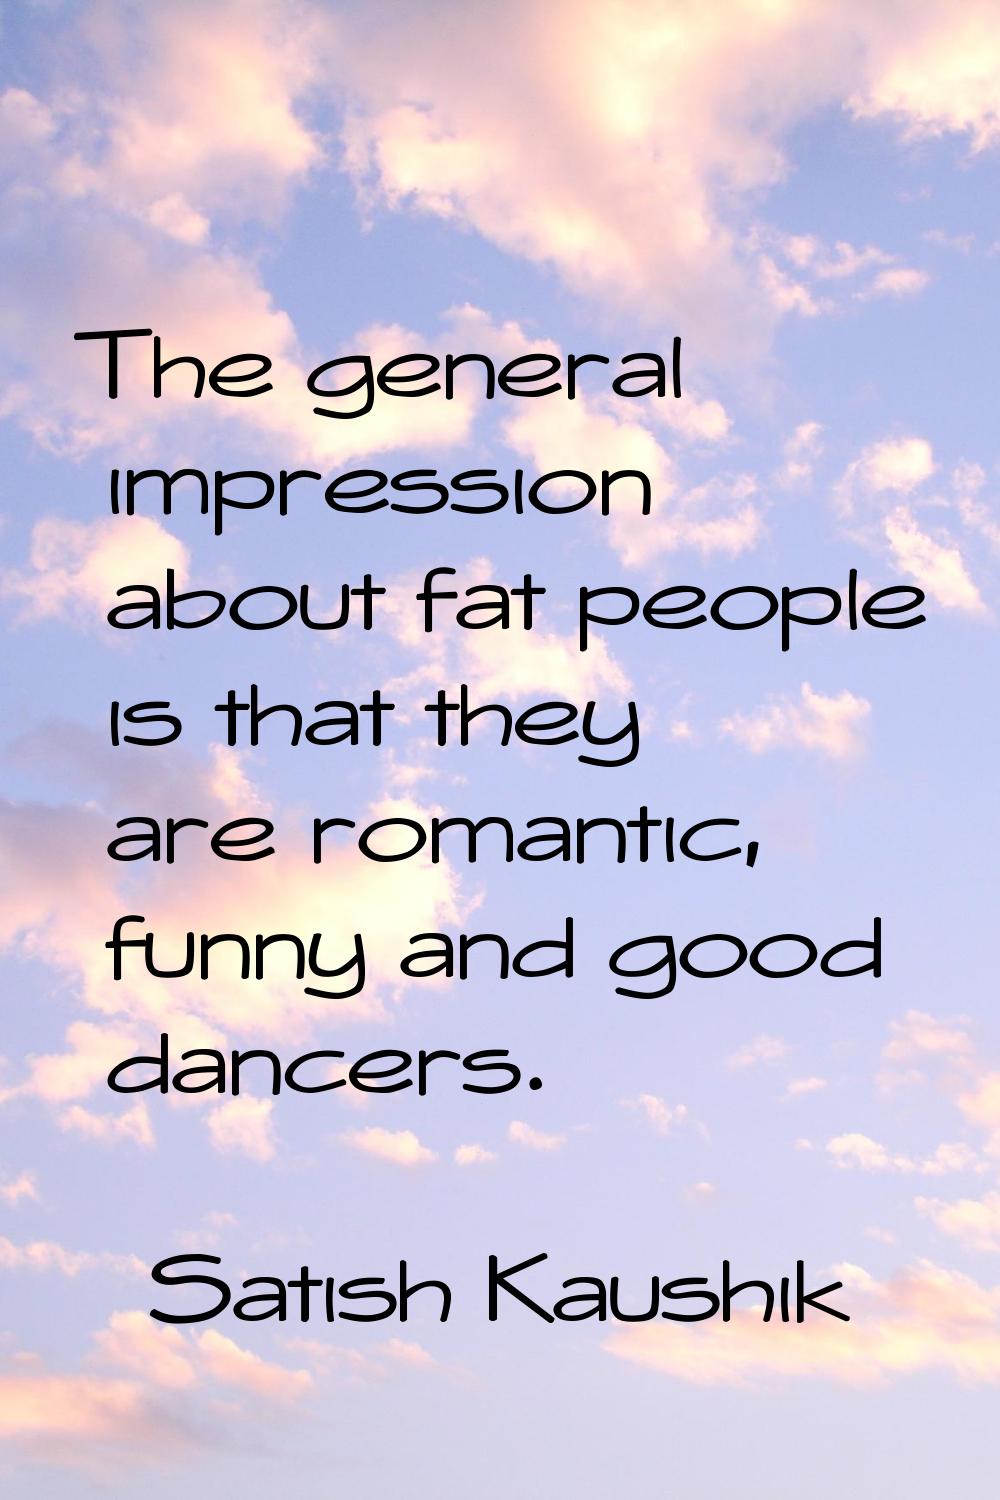 The general impression about fat people is that they are romantic, funny and good dancers.